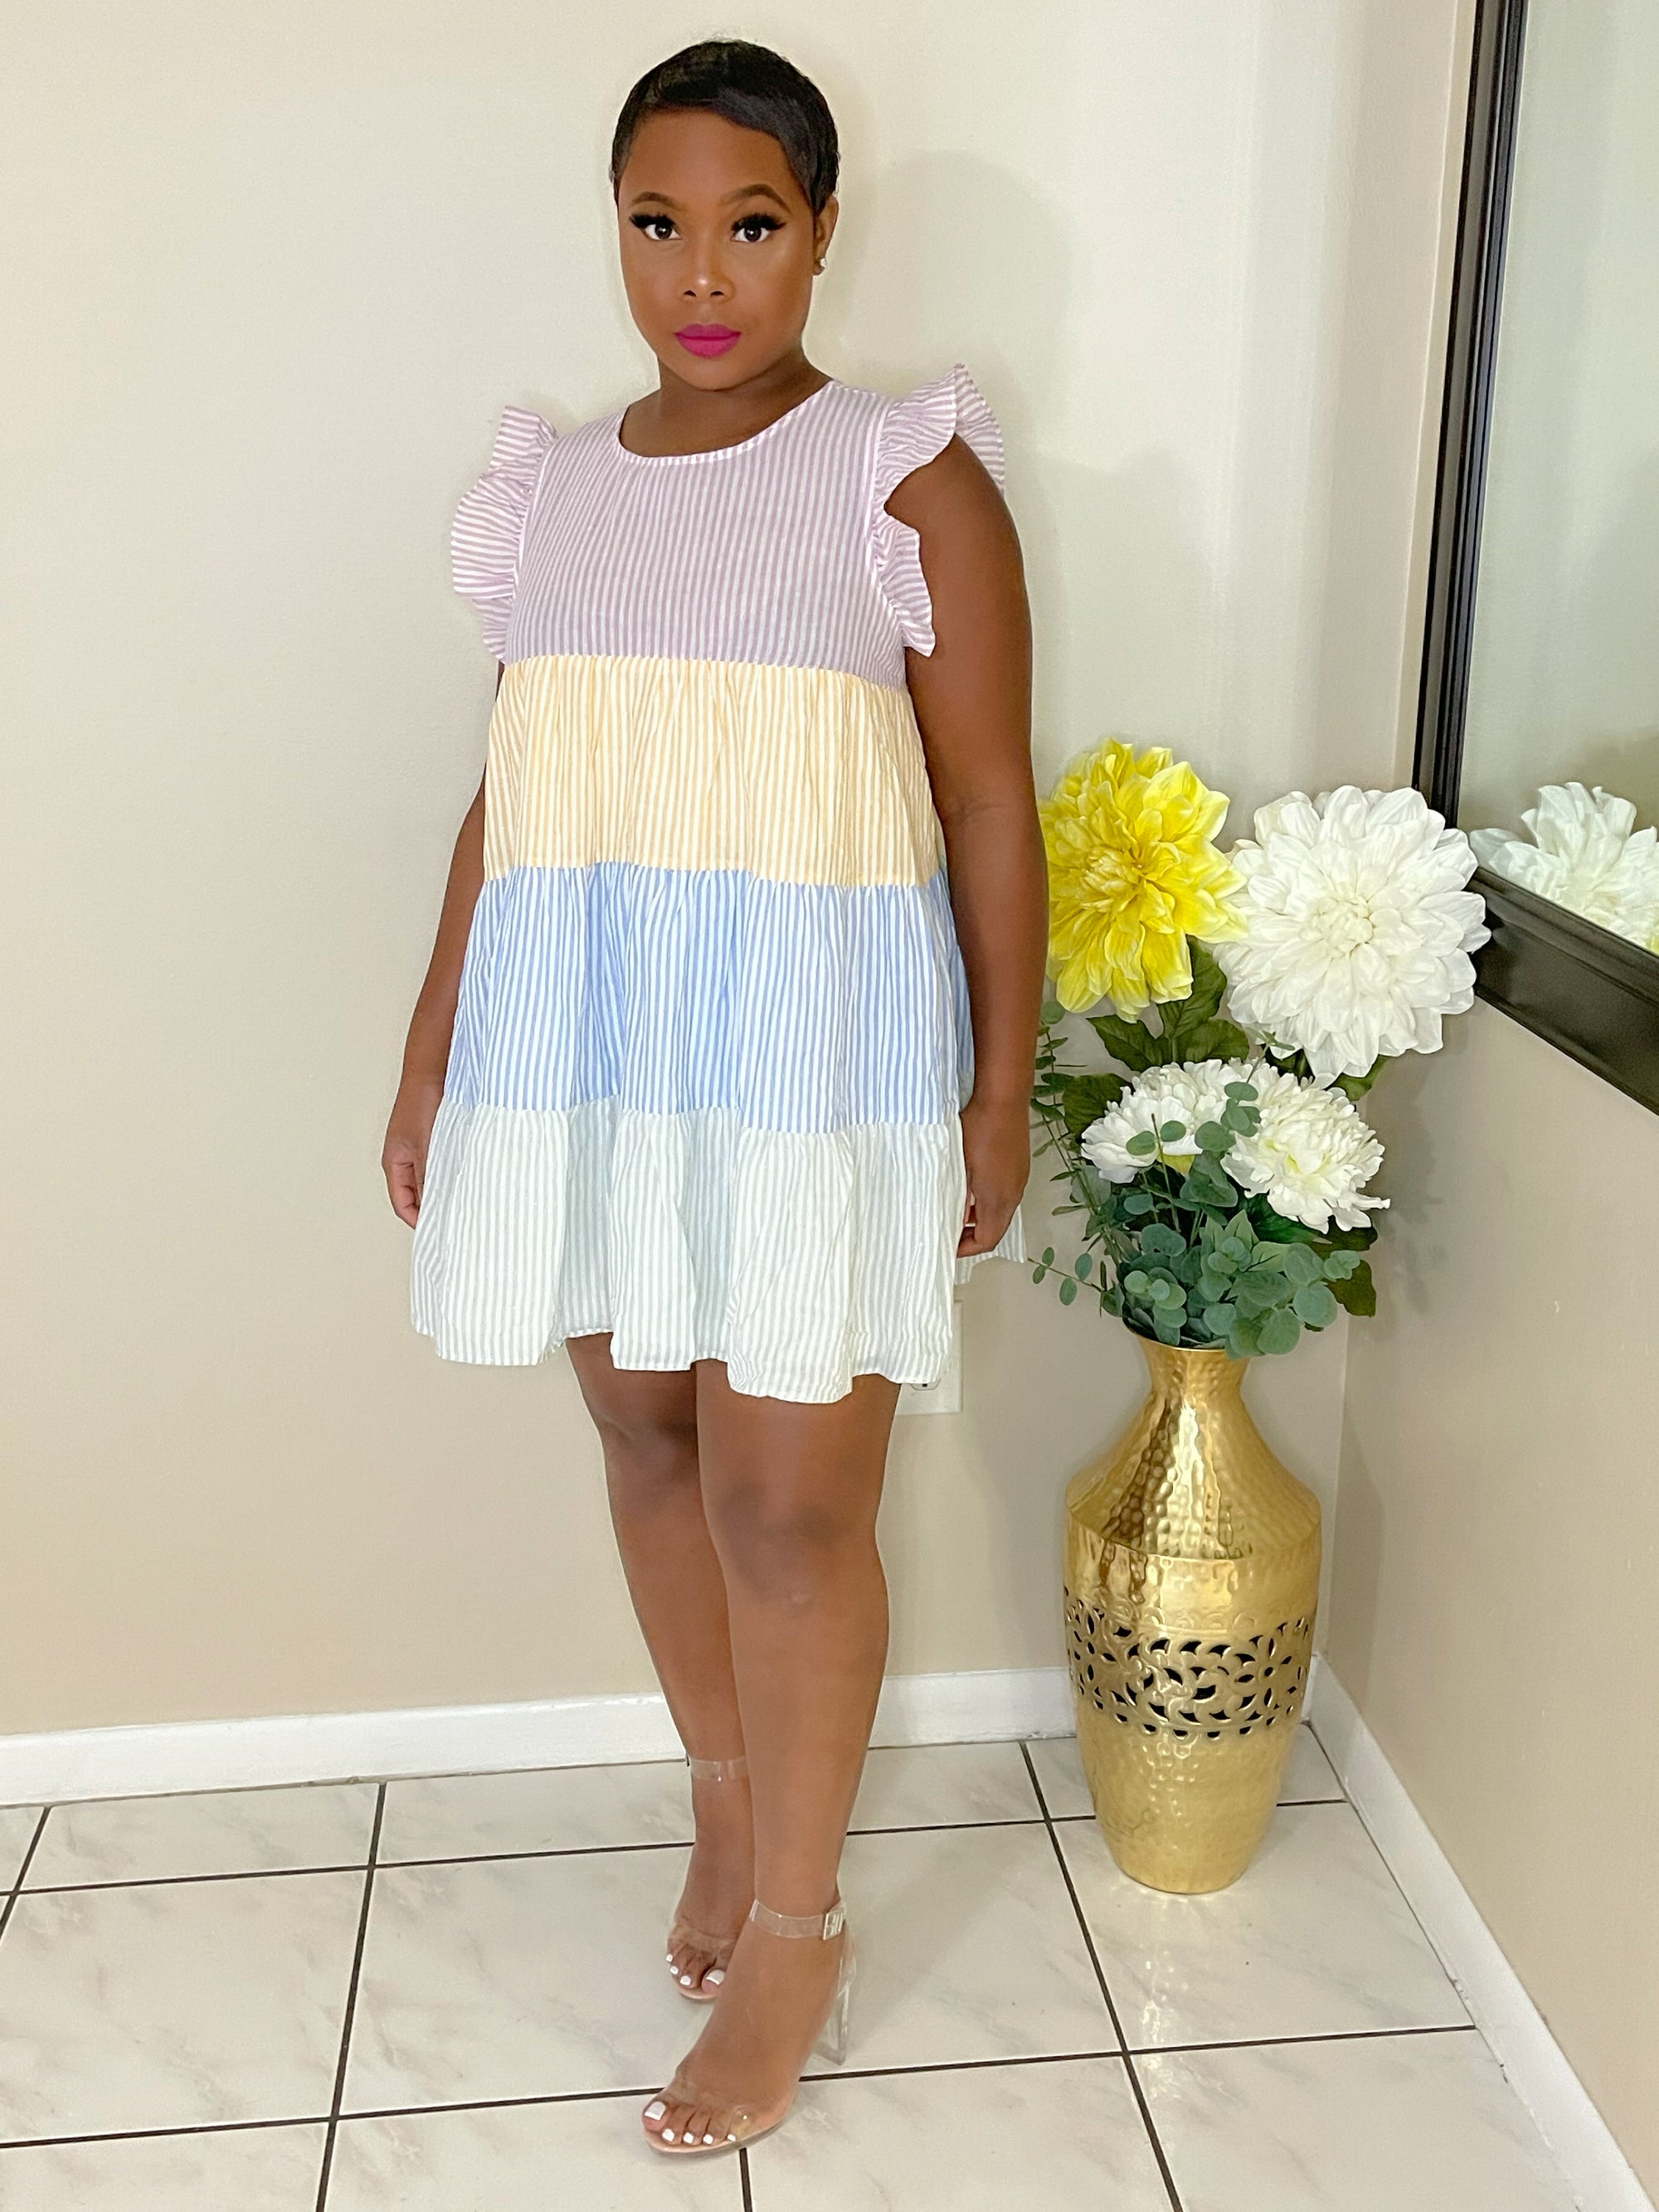 How to wear a Baby Doll Dress